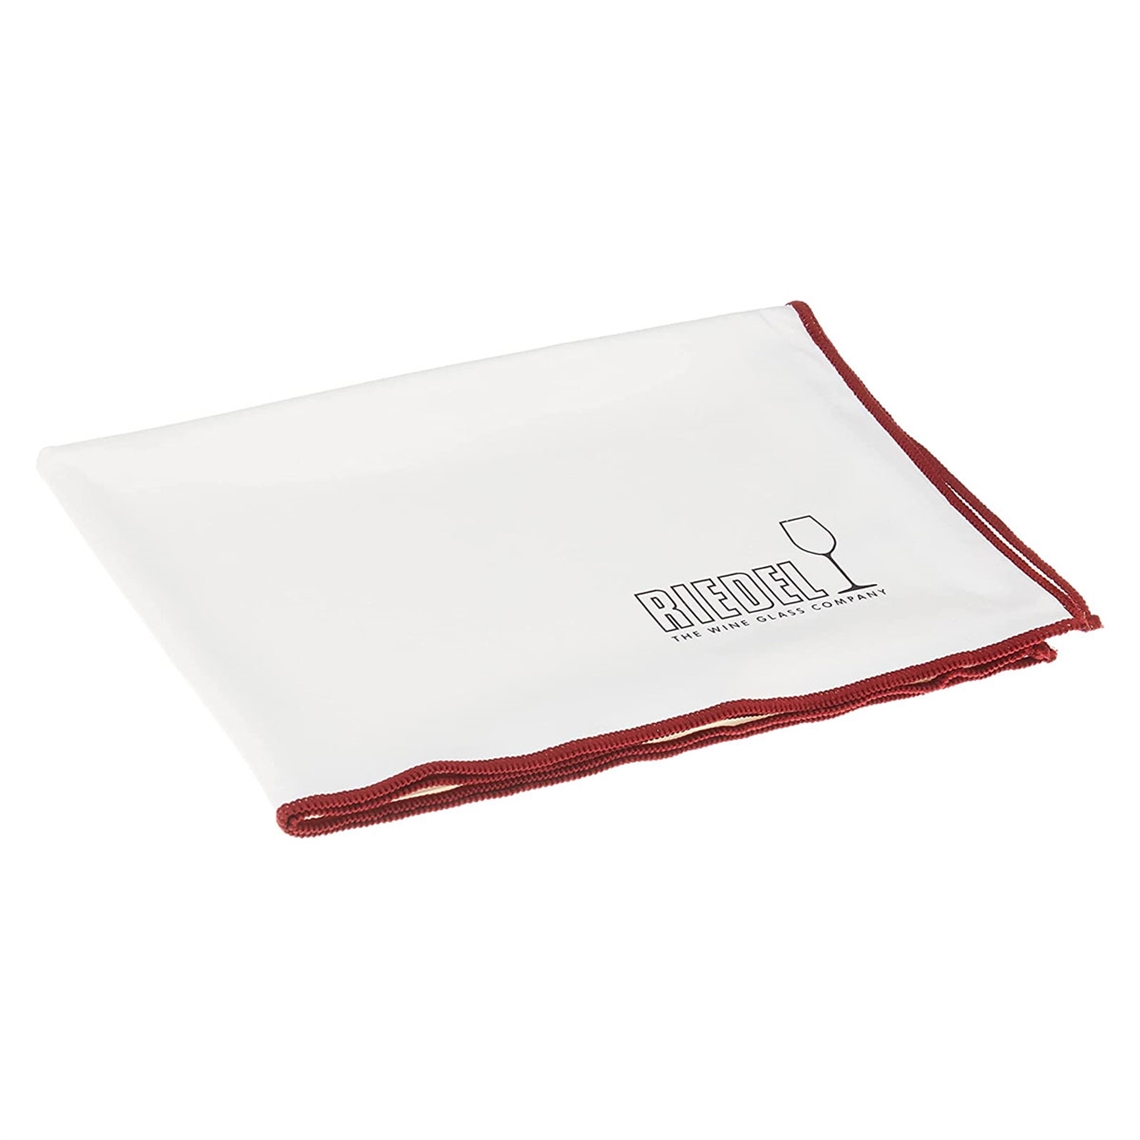 Riedel Microfibre Cleaning Polishing Cloth - White with Burgundy Trim